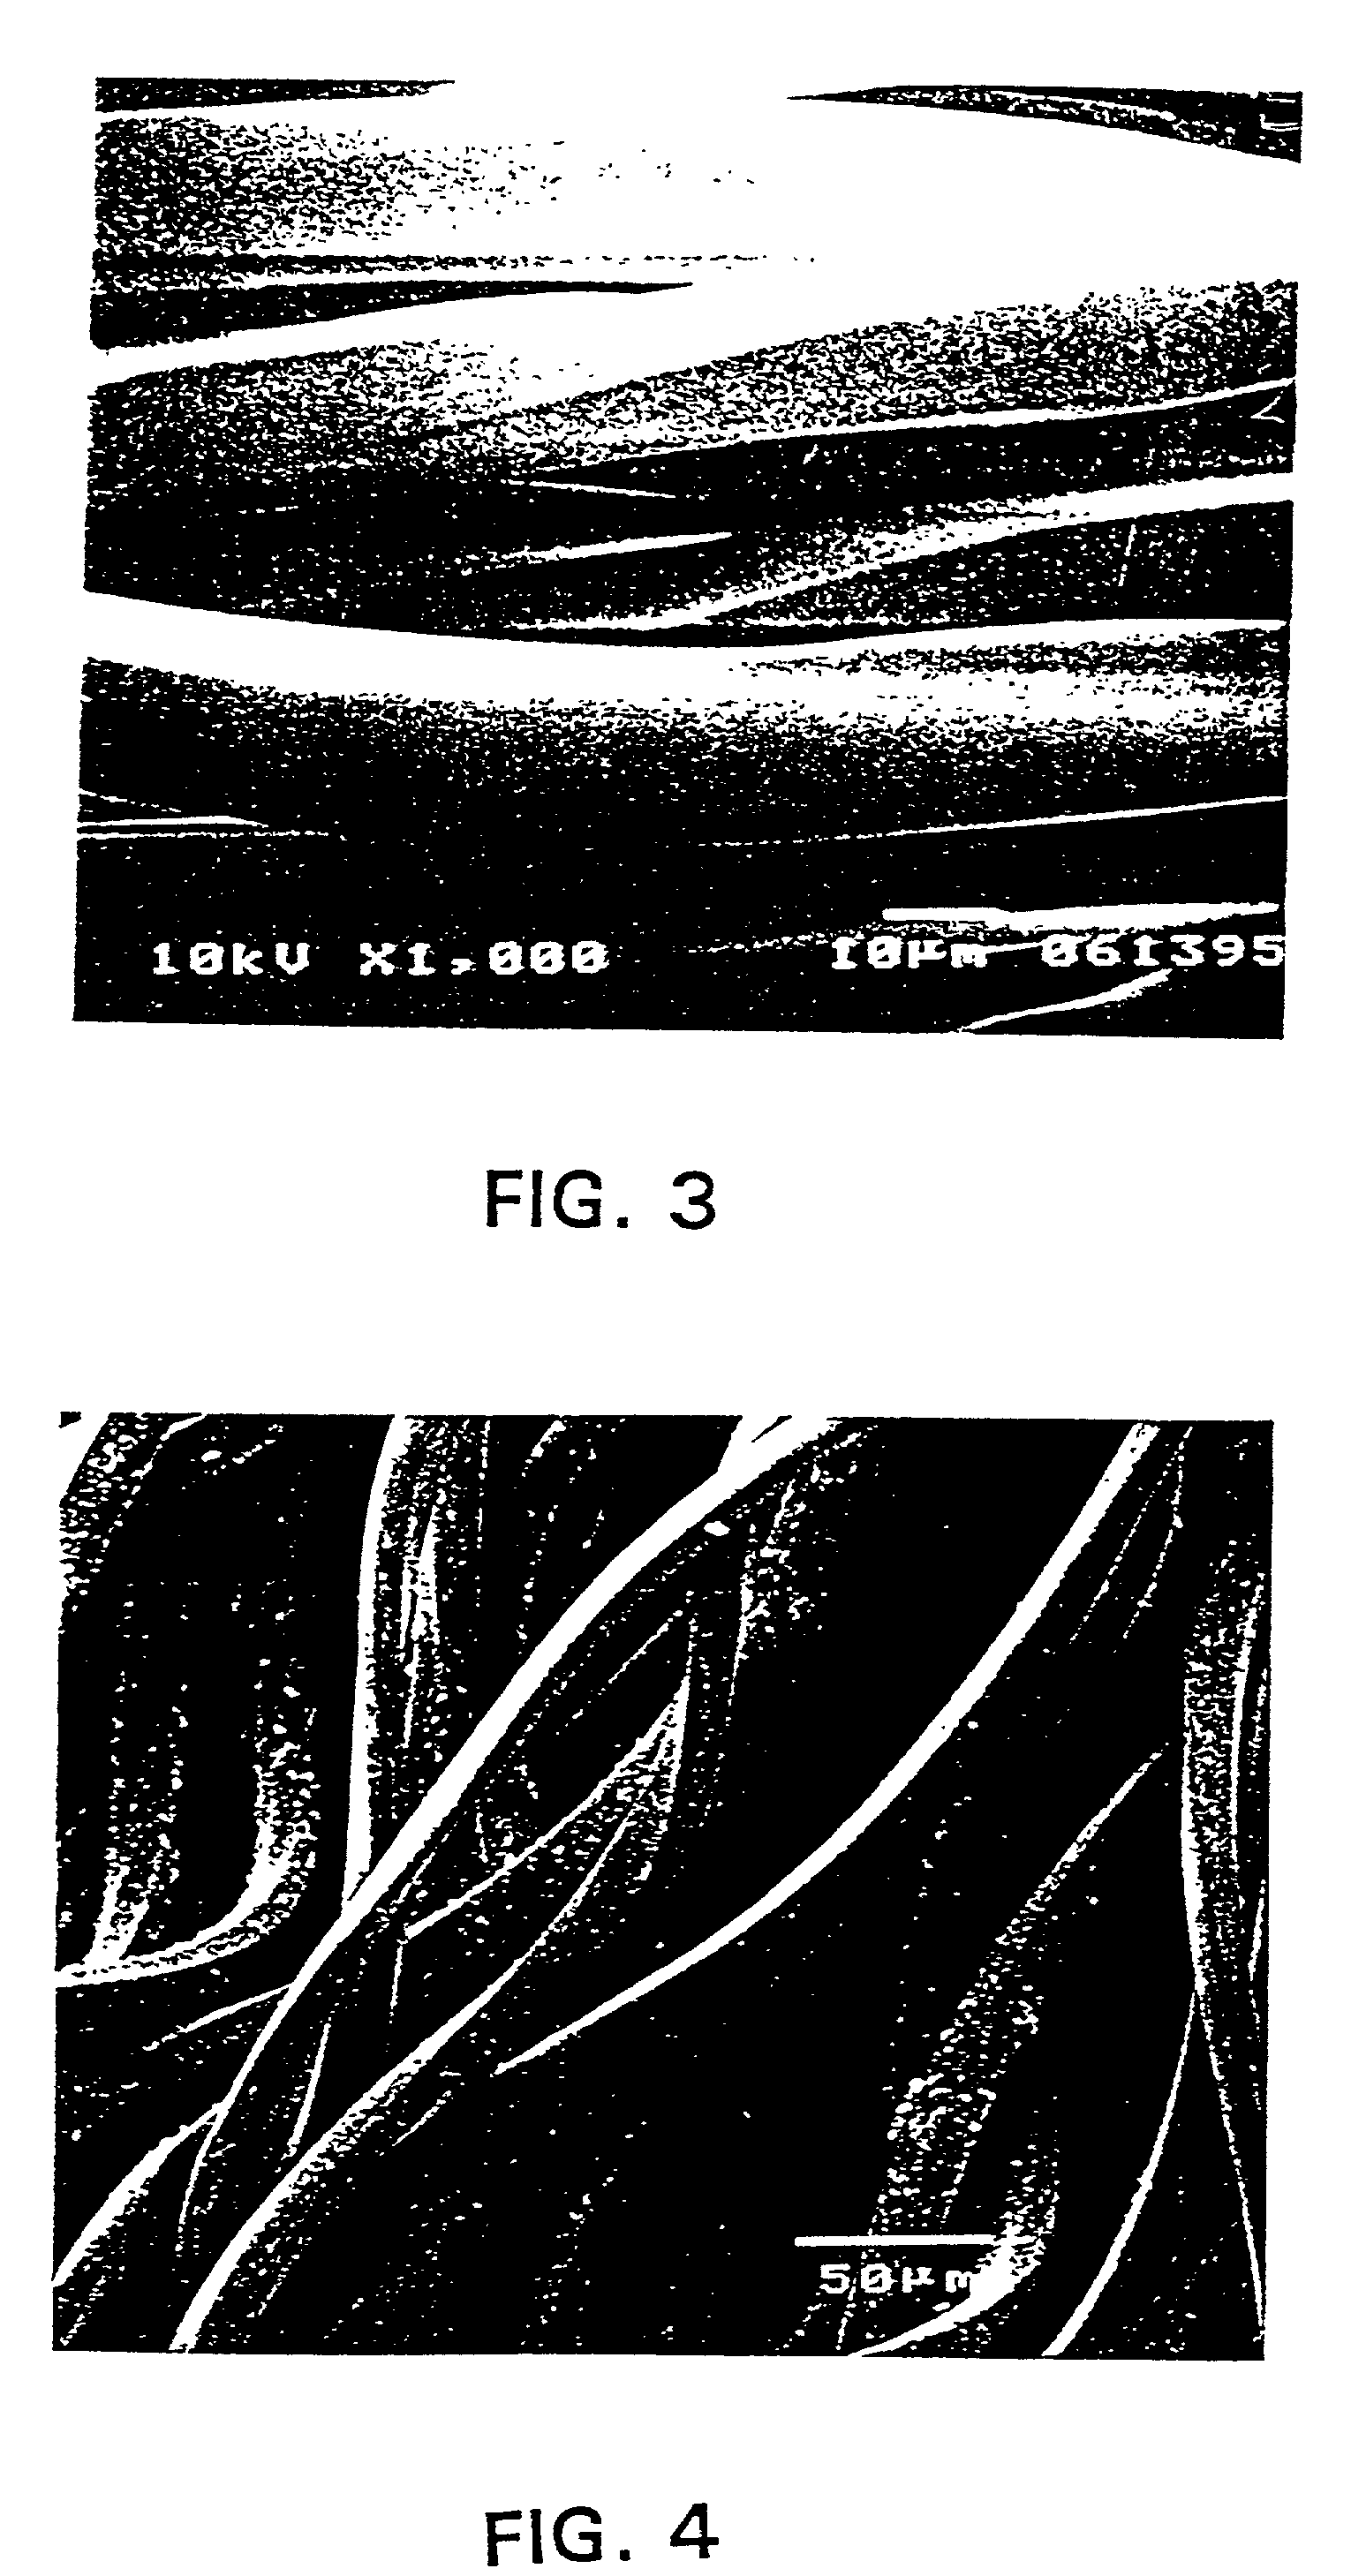 Anti-static cleanroom products and methods of making same